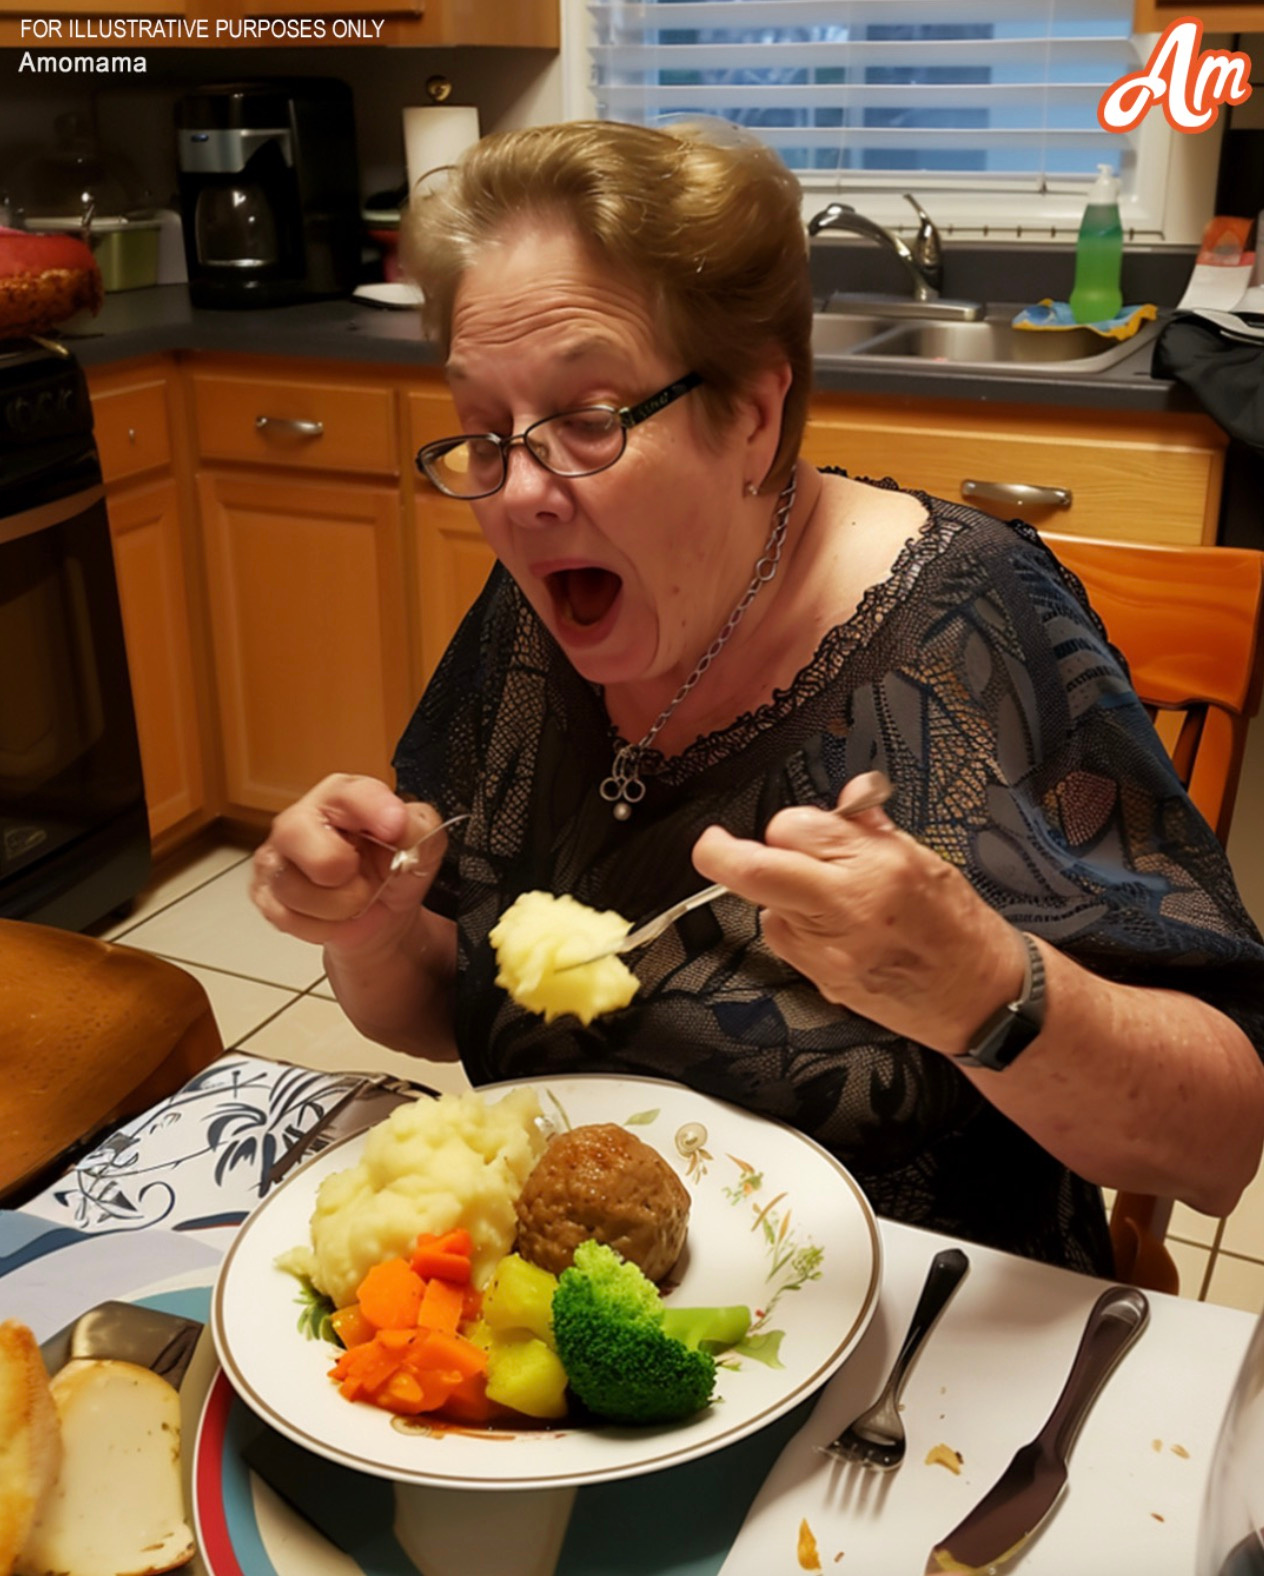 My Selfish Mother-in-Law Devoured My Meal & Posted on Facebook Rather Than Saying Sorry